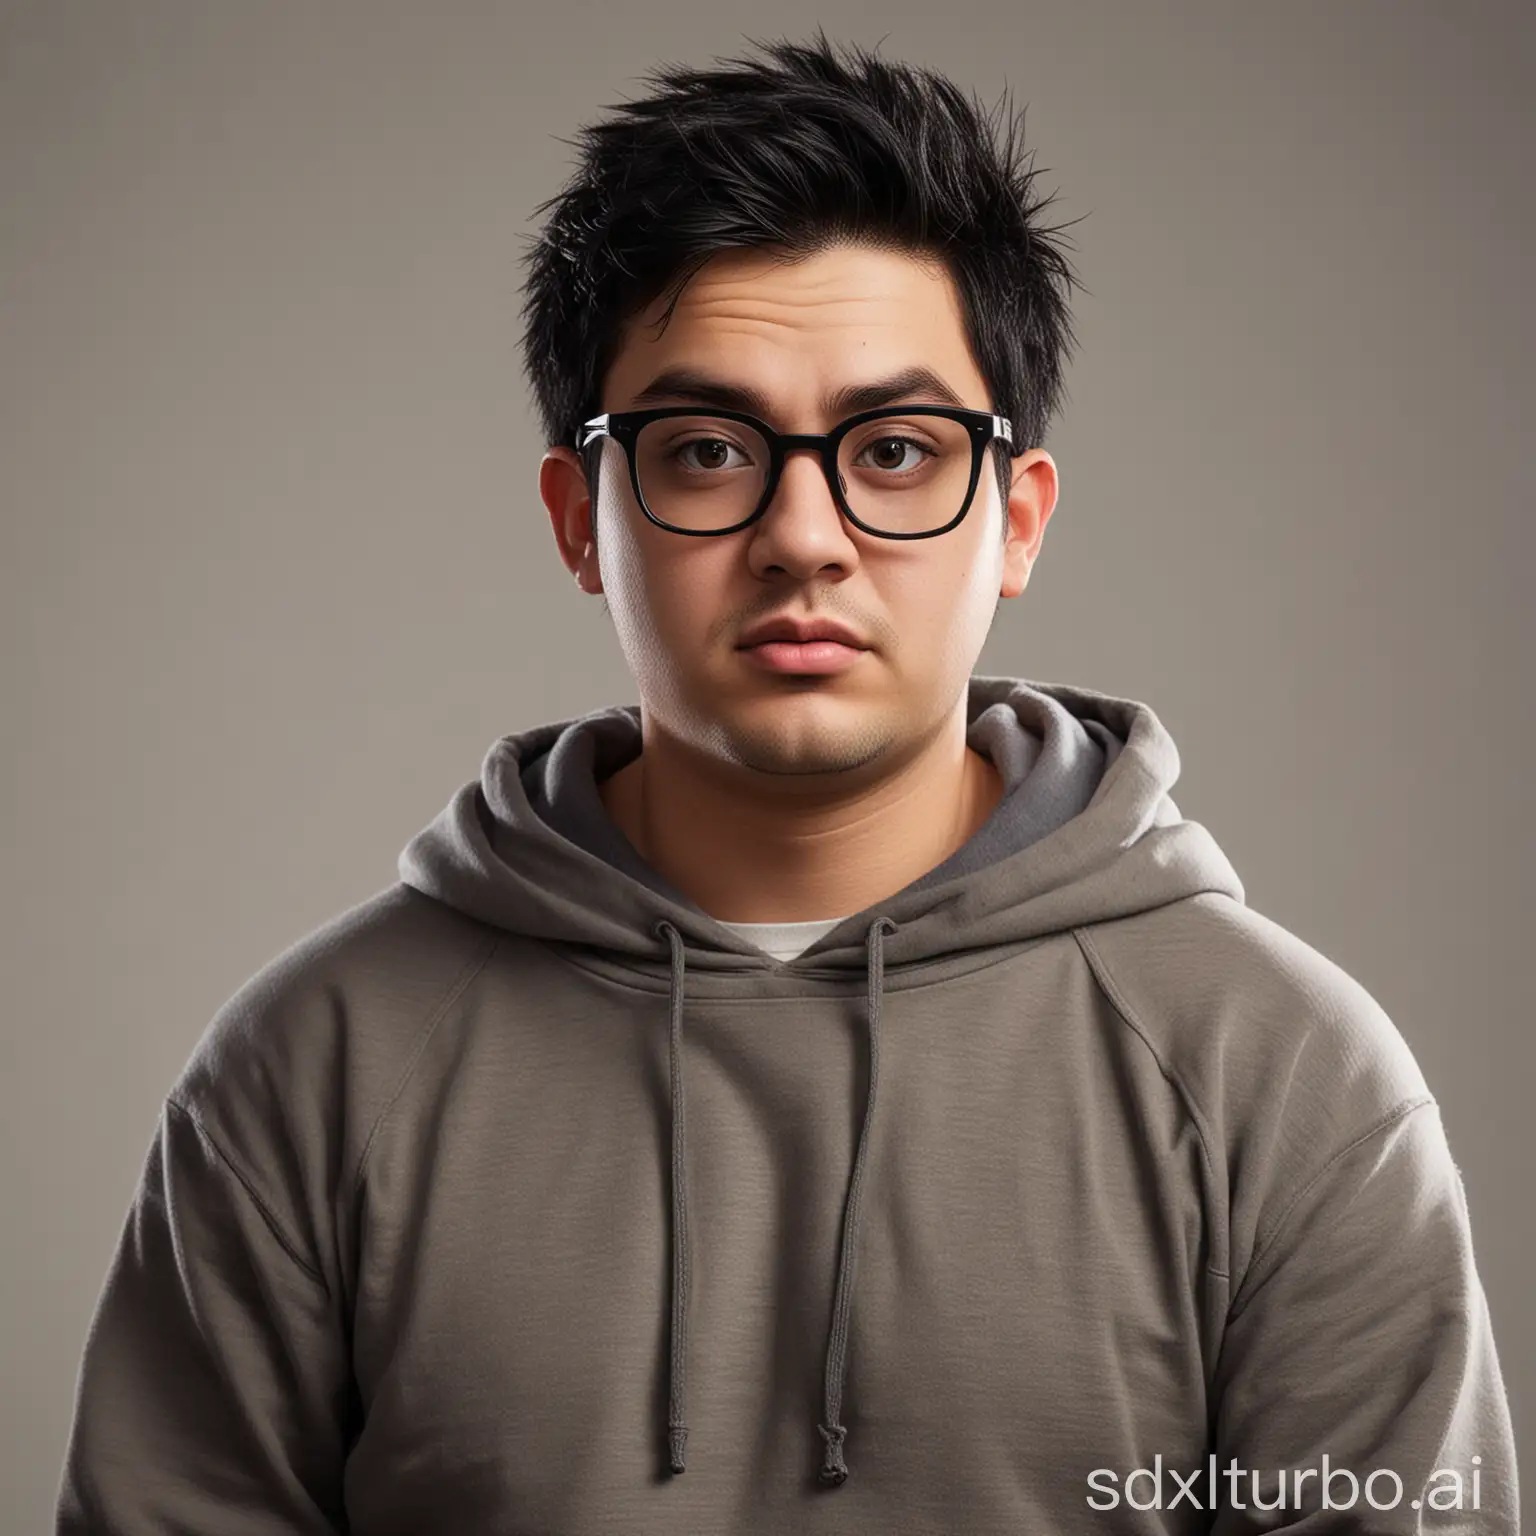 Create male upper body with large head and he is chubby. A 30 year old man with large eye shape and glasses, standing at the front wearing a hoody with black hair